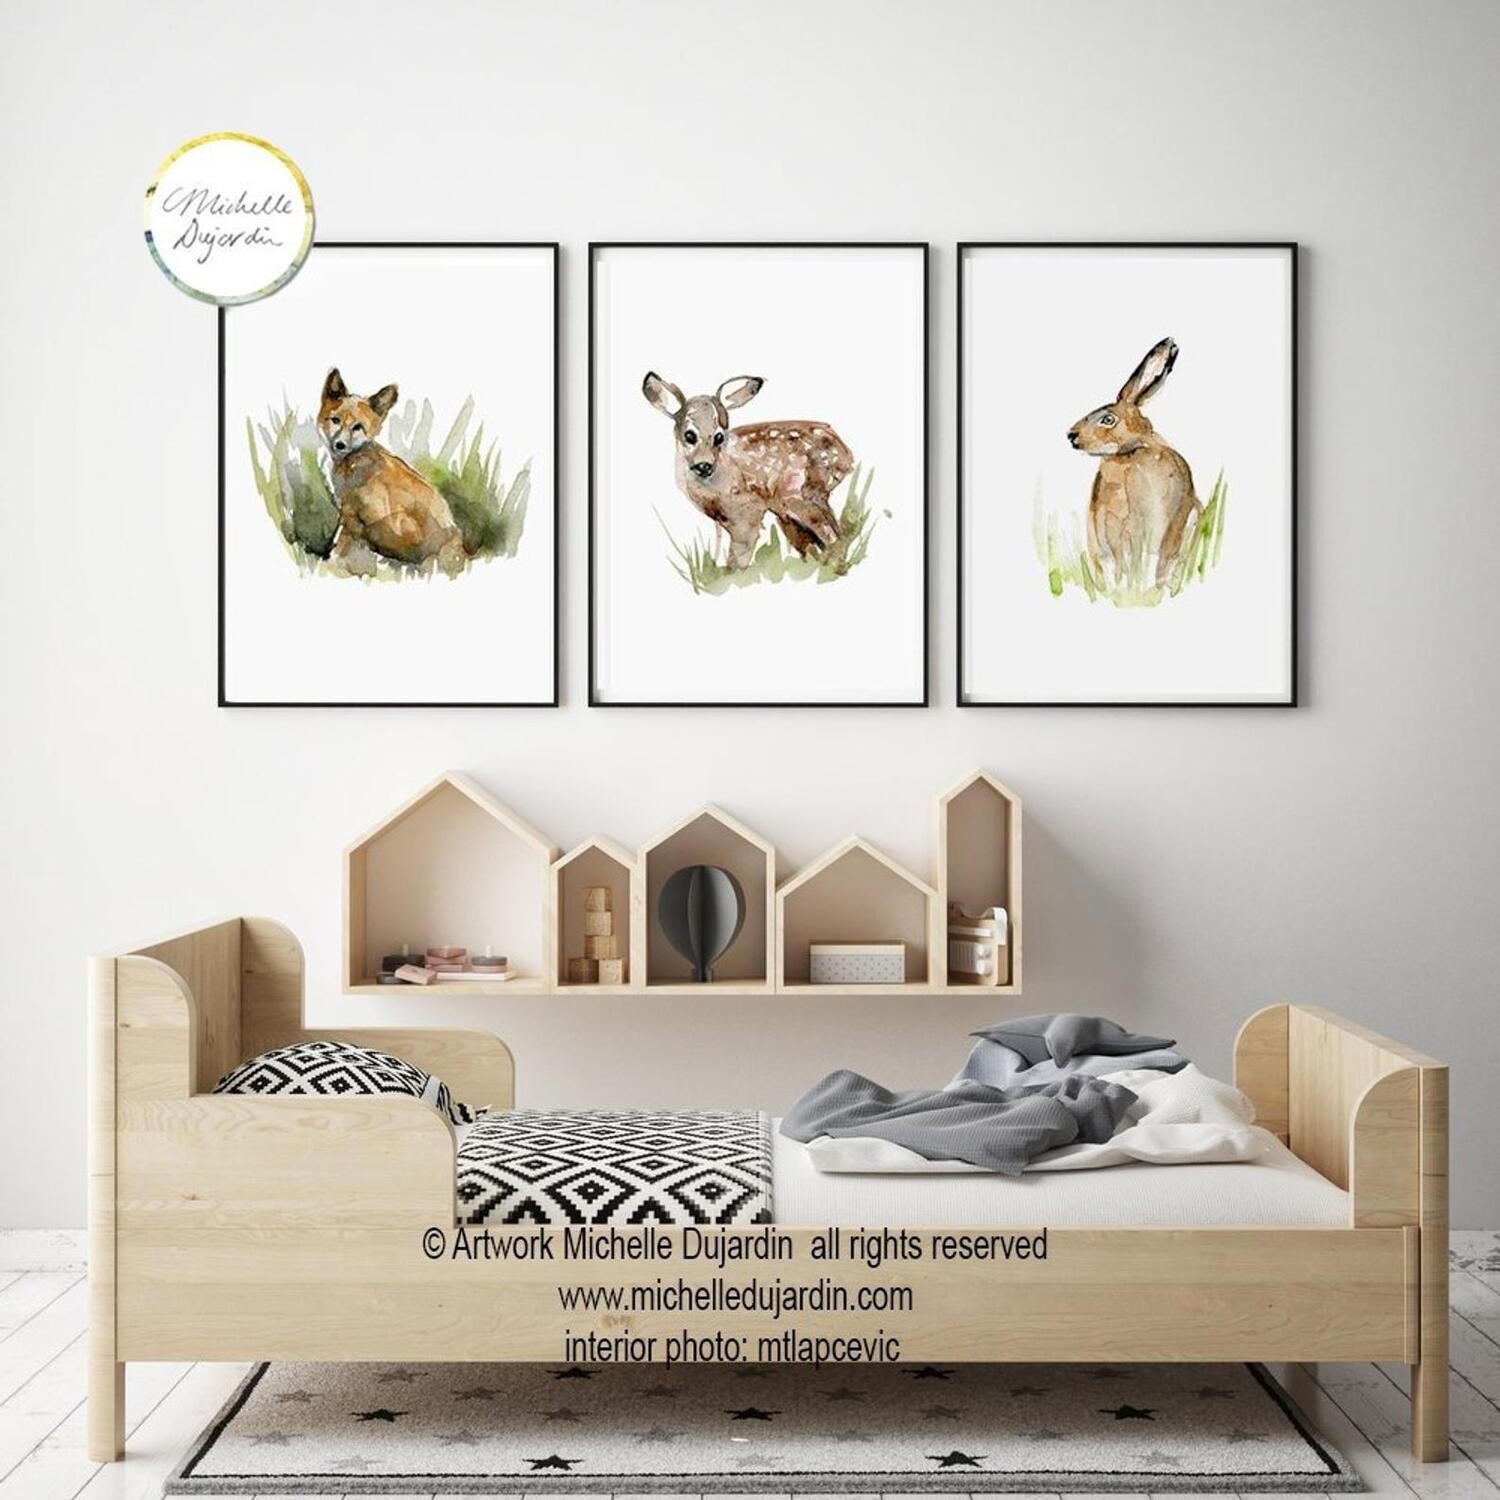 Set of 3 forest animal prints with a
hare, fawn and fox painting